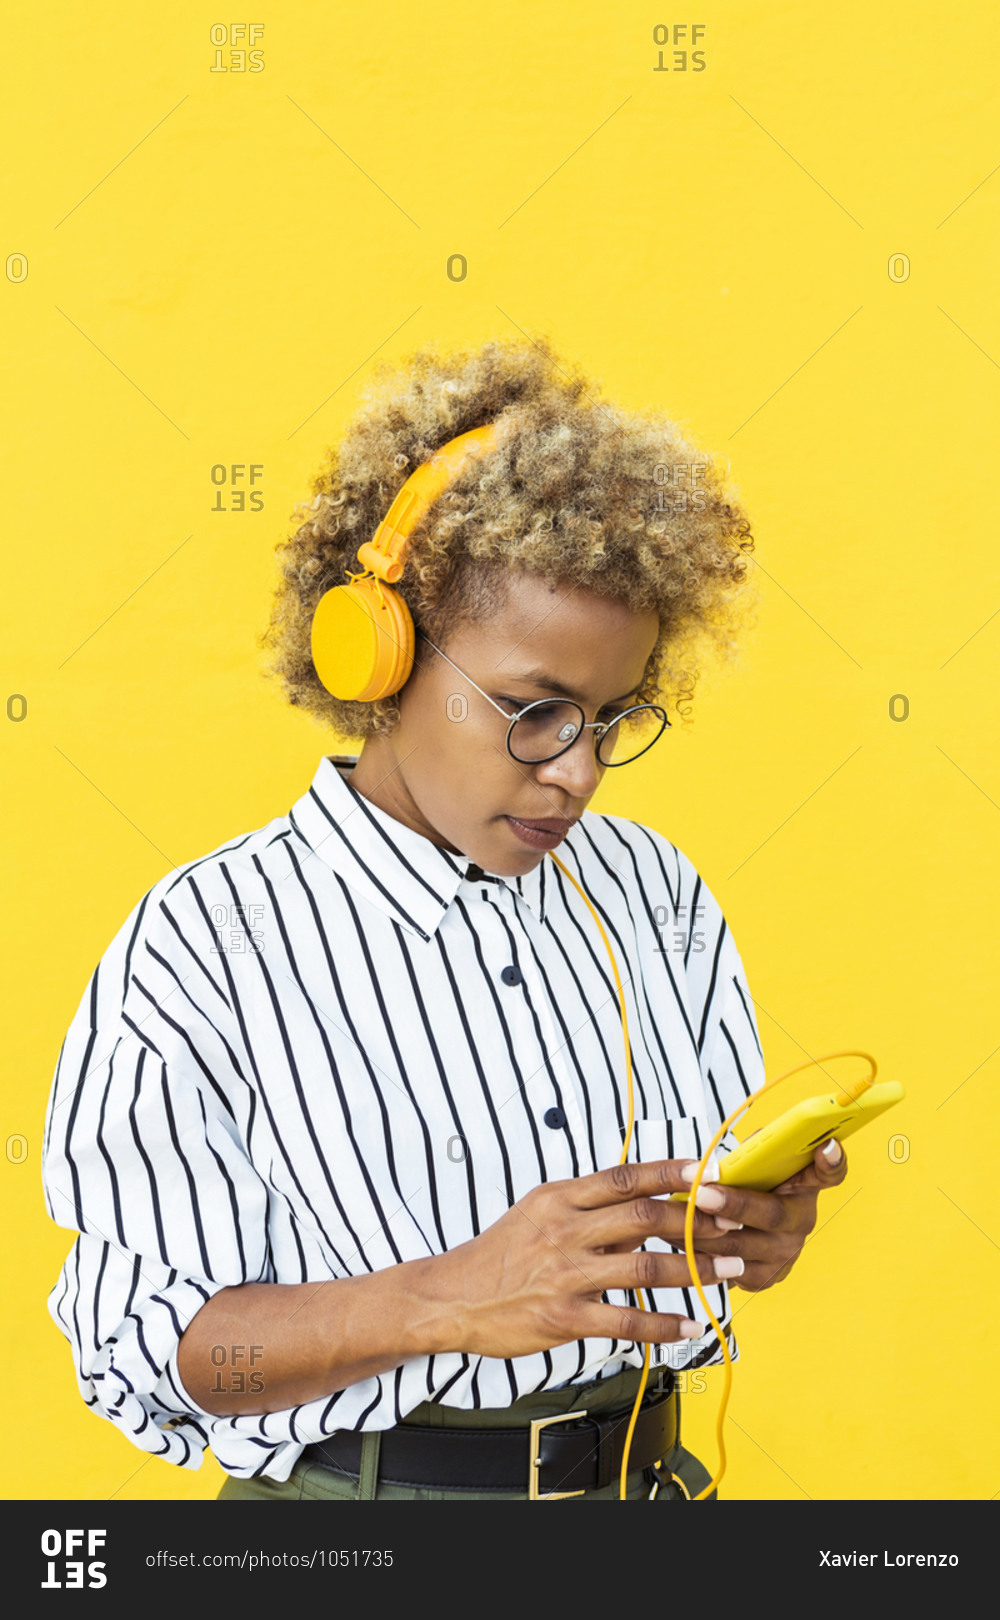 Curly haired woman listing to music while using a smartphone on a yellow background